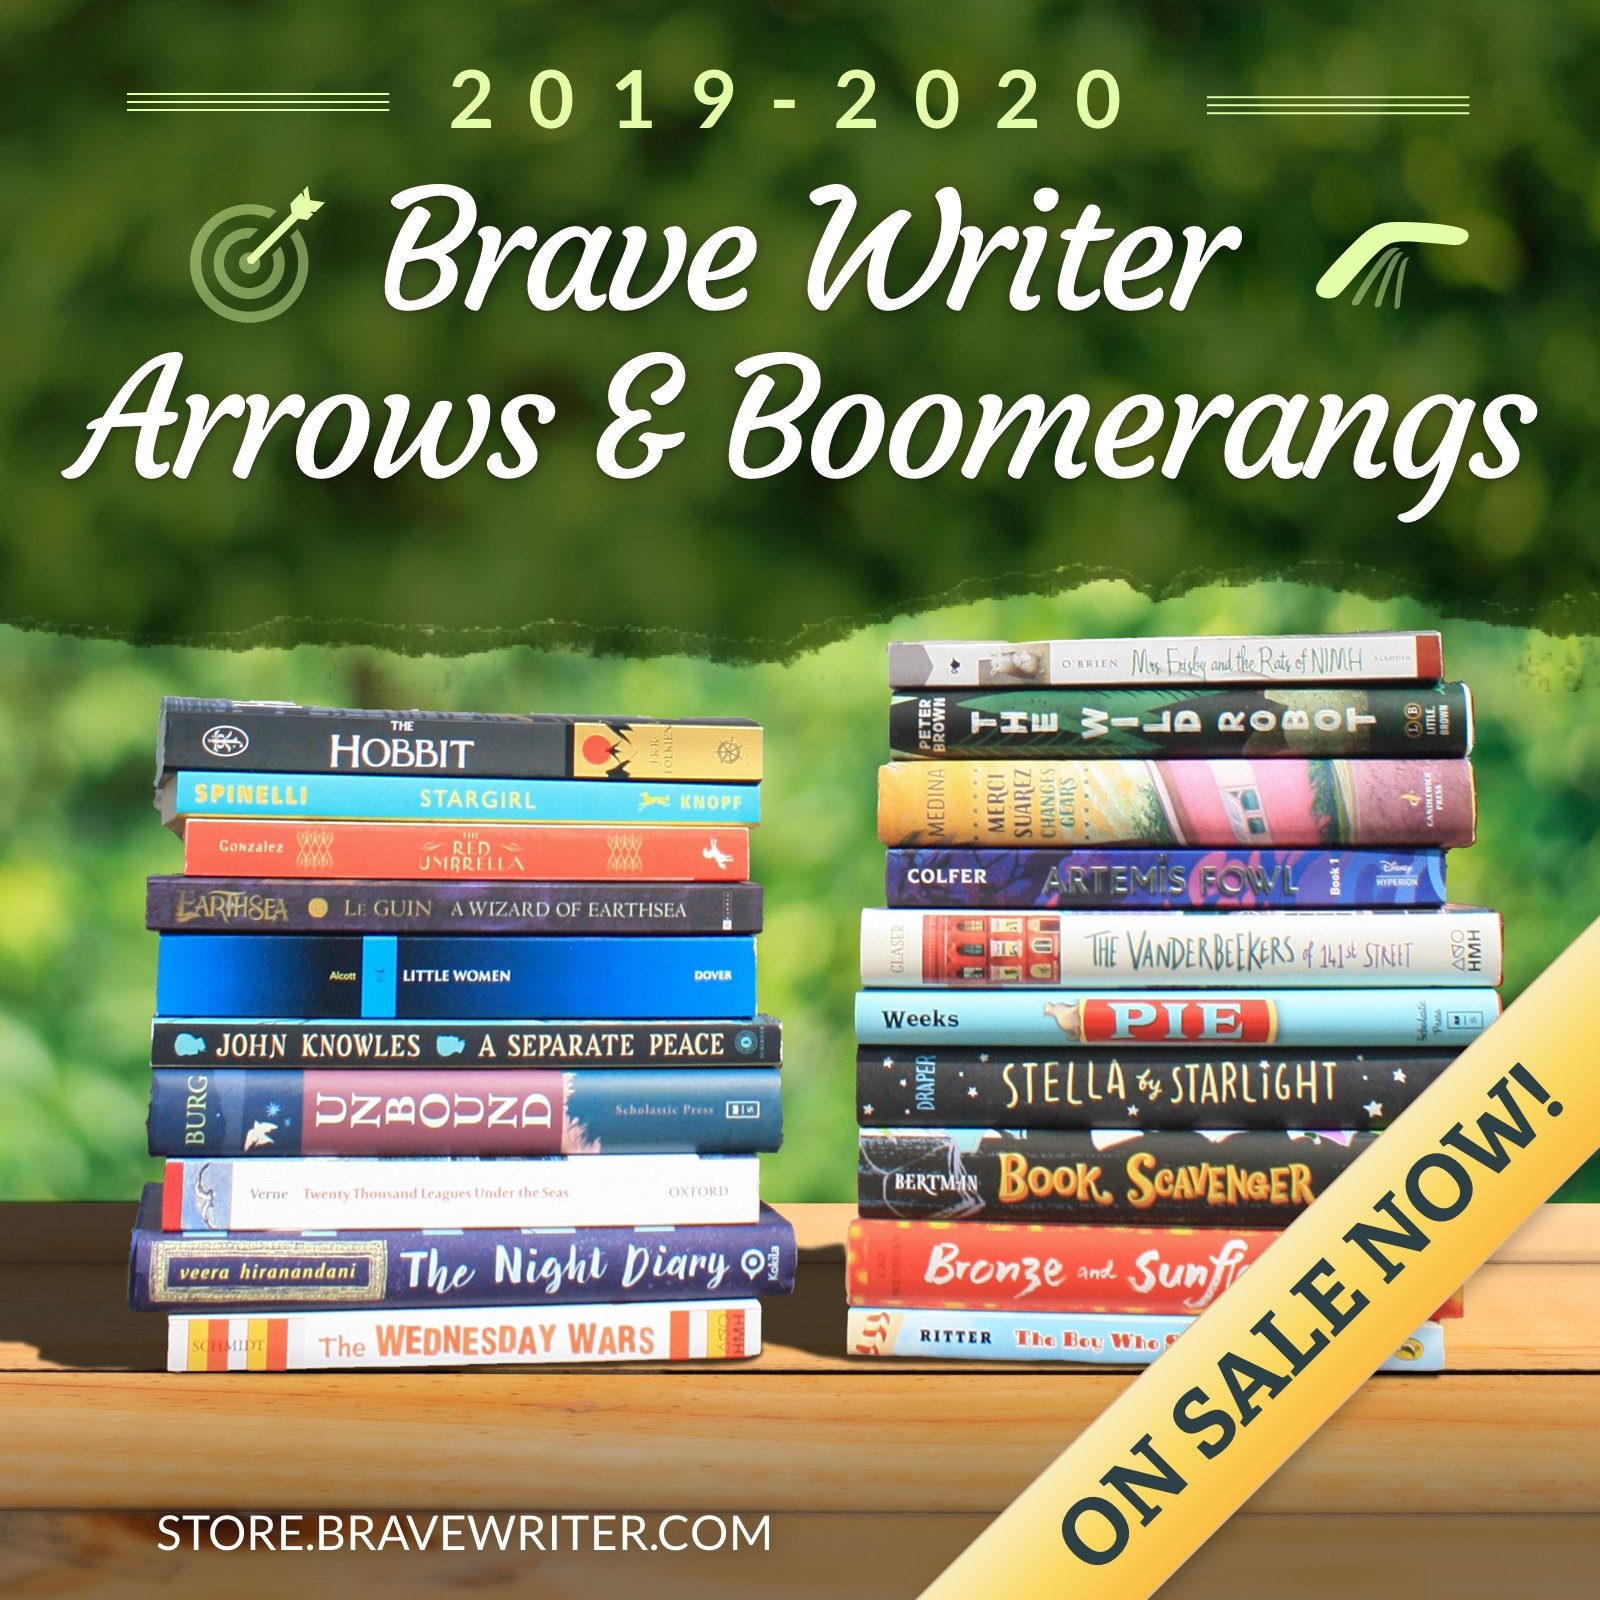 Brave Writer 2019-2020 Arrows and Boomerangs